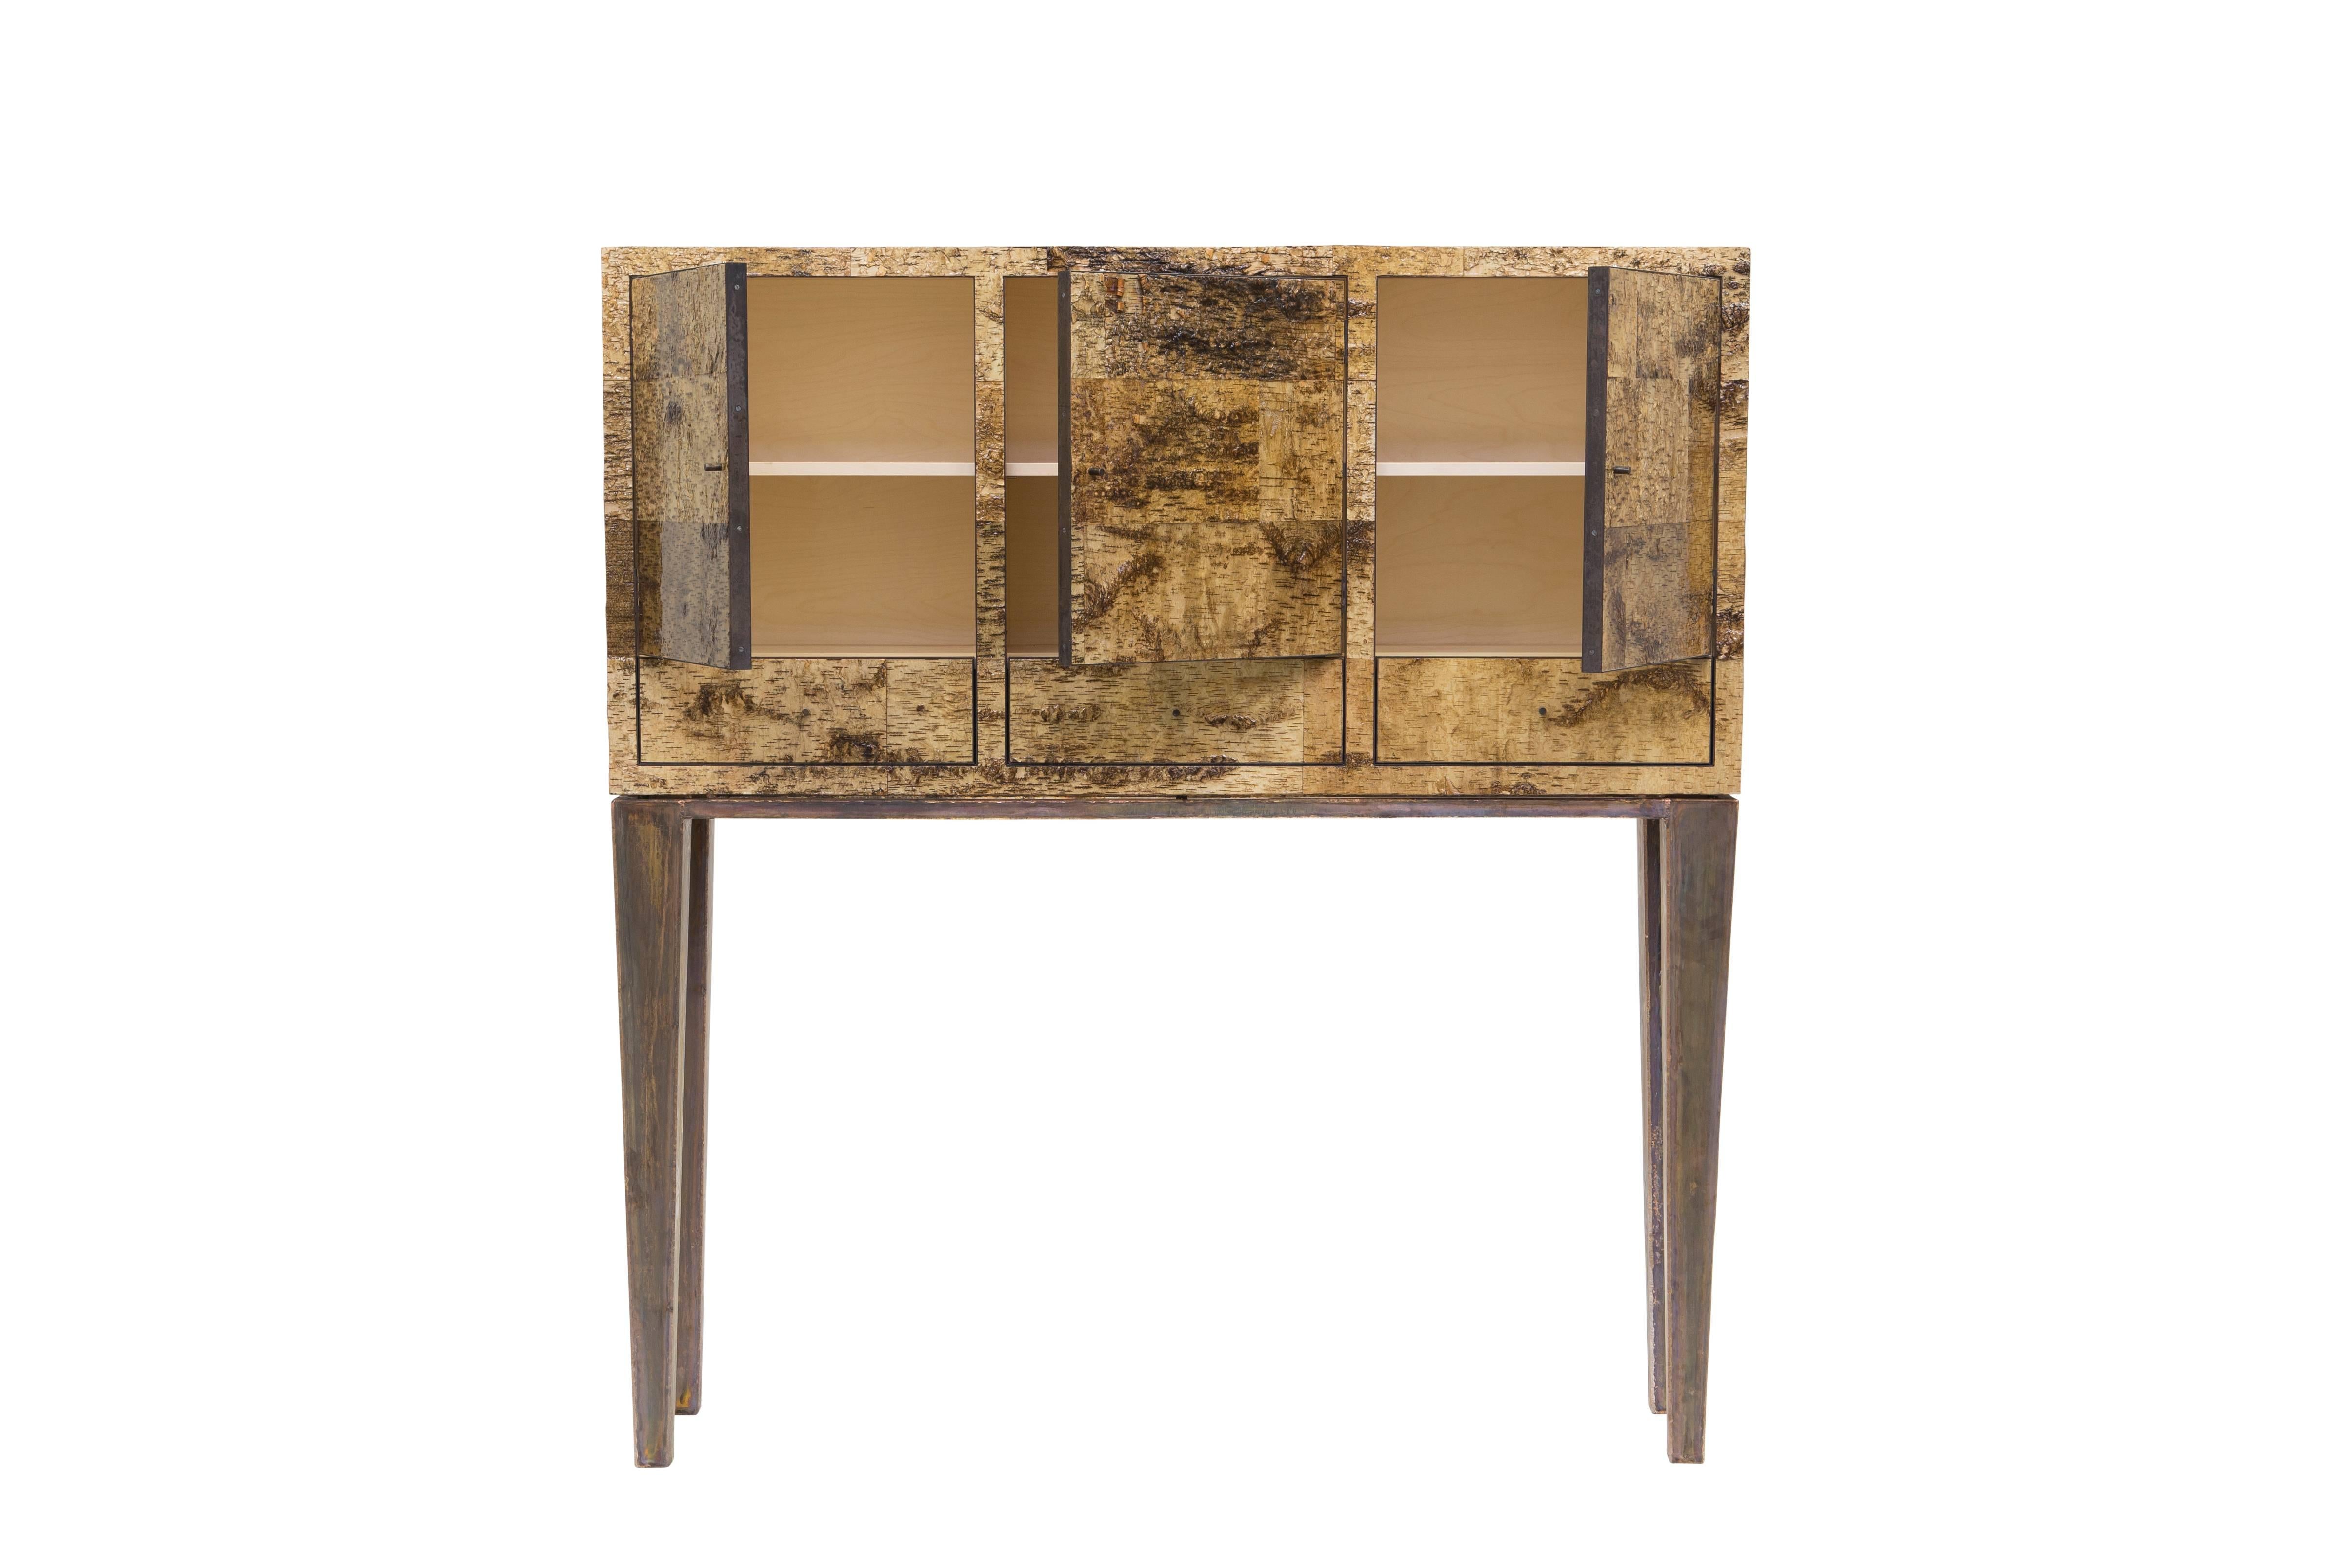 Birchwood Dressoir High.
Material: Light birchwood, plywood, epoxy
and bronze.
Size: 170 x 150 x 42 cm.
Signed Werner Neumann.

The Birchwood collection: Werner Neumann found loose pieces of birchwood while hiking in the woods, brought them to